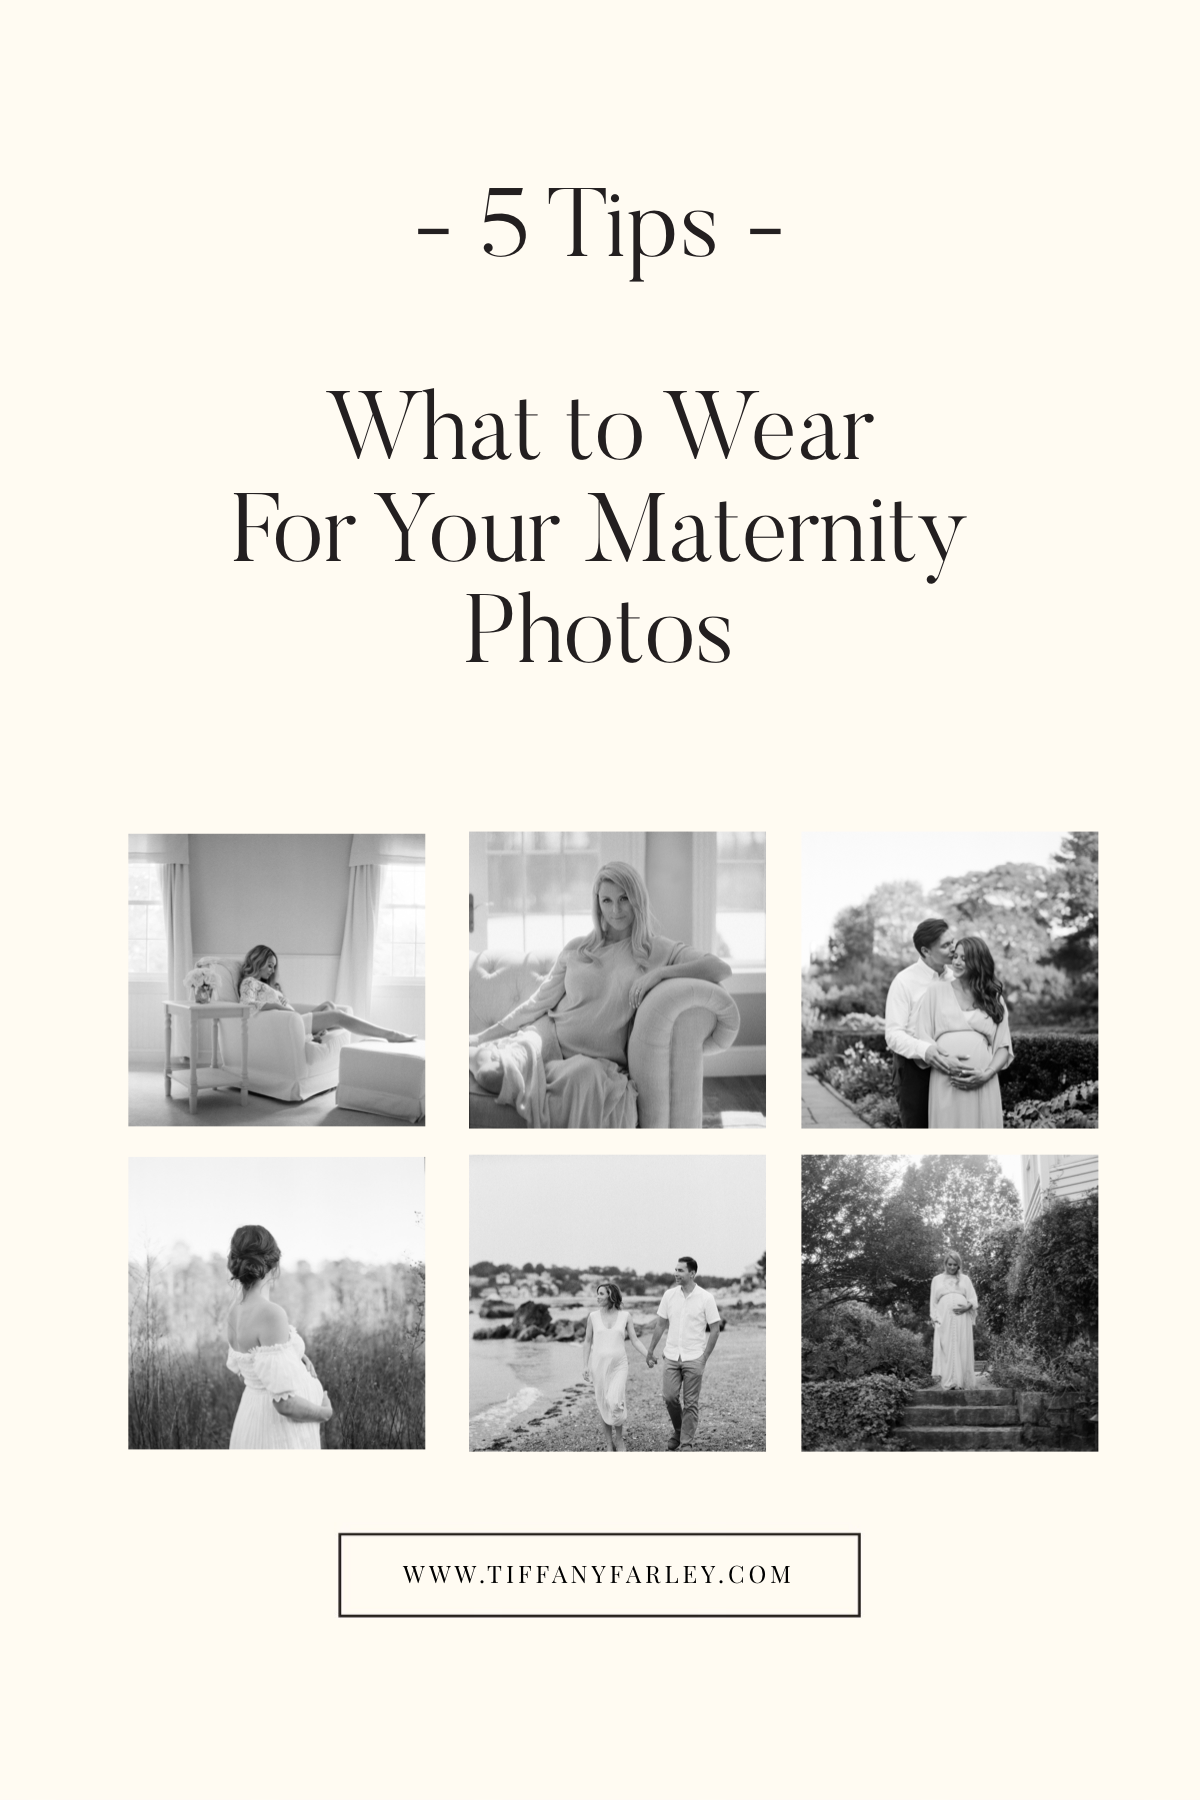 What to Wear for Maternity Photos- Coral Springs Florida Maternity Photographer Tiffany Farley